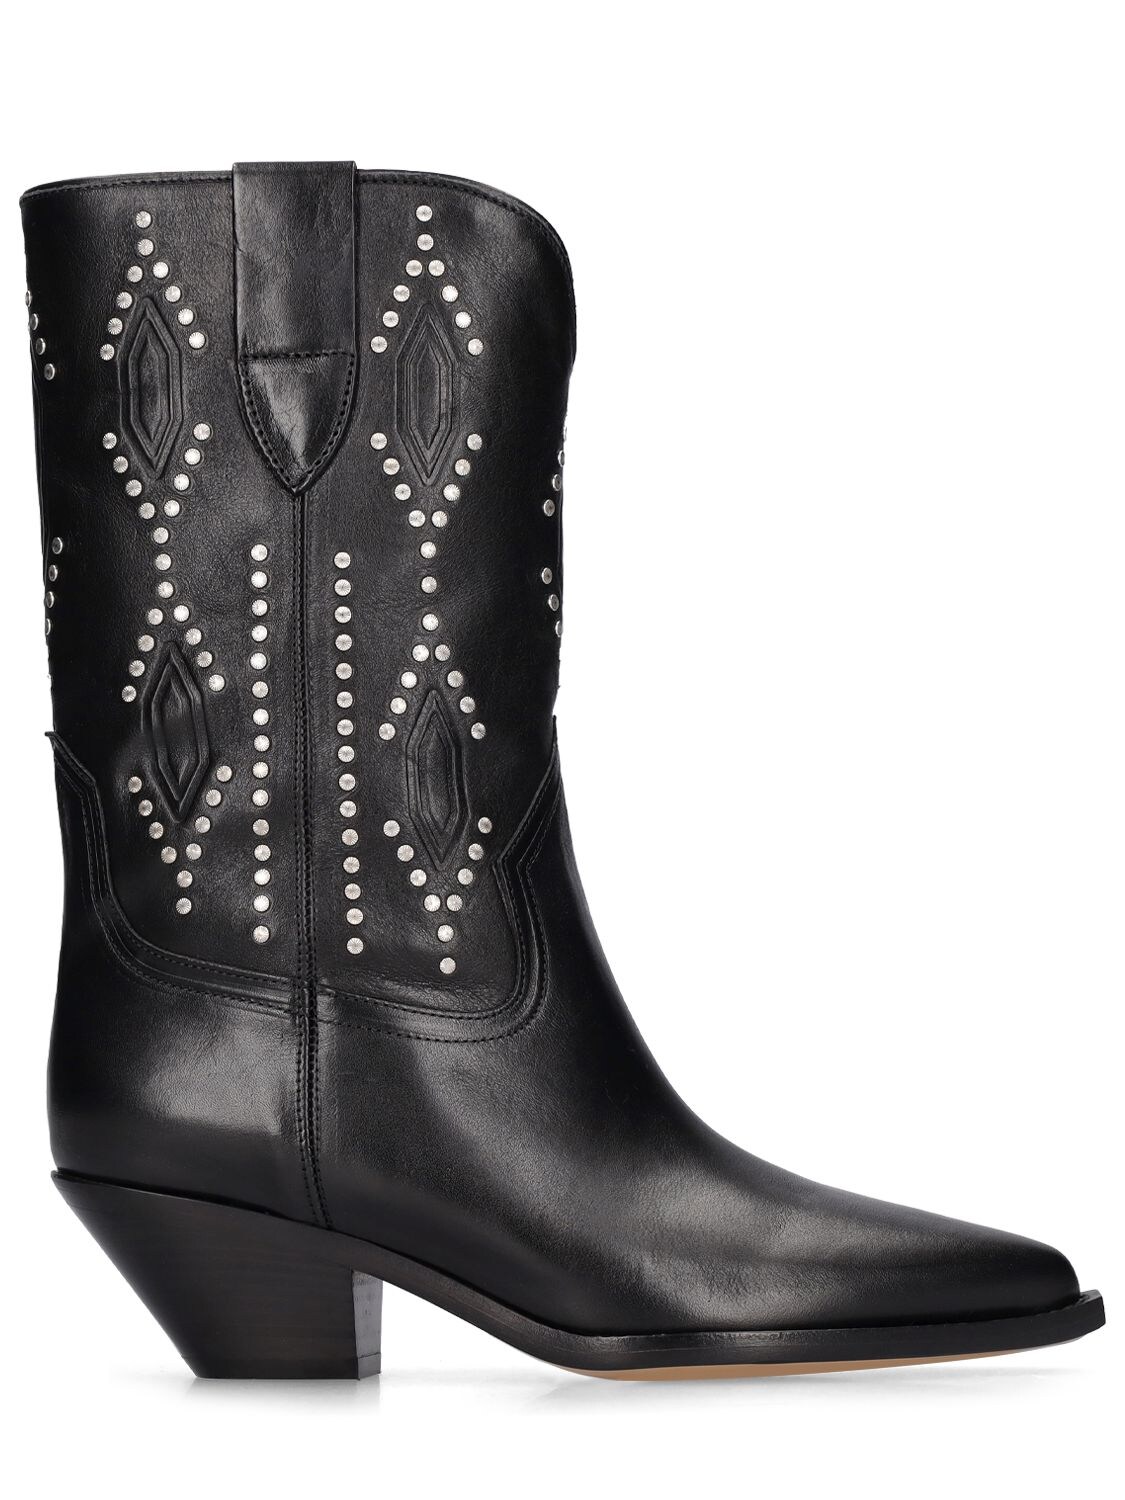 40mm Dahope-gd Leather Ankle Boots – WOMEN > SHOES > BOOTS